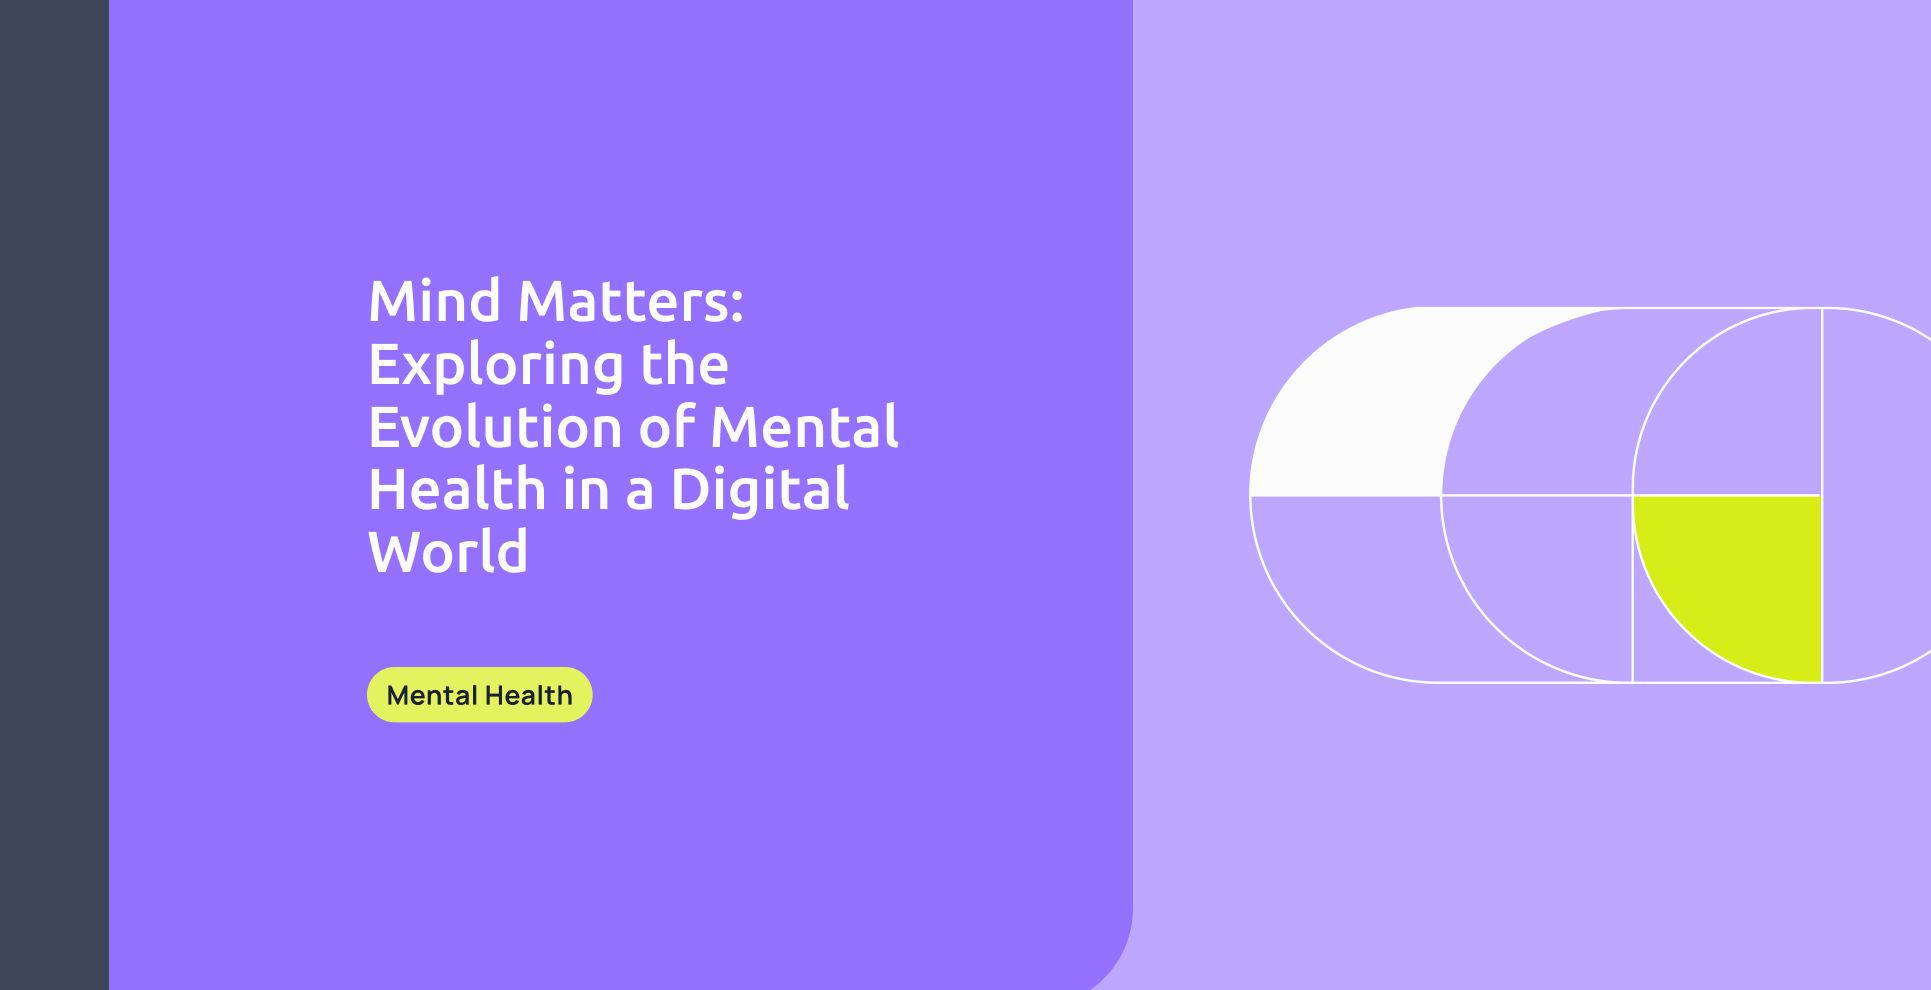 Mind Matters: Exploring the Evolution of Mental Health in a Digital World